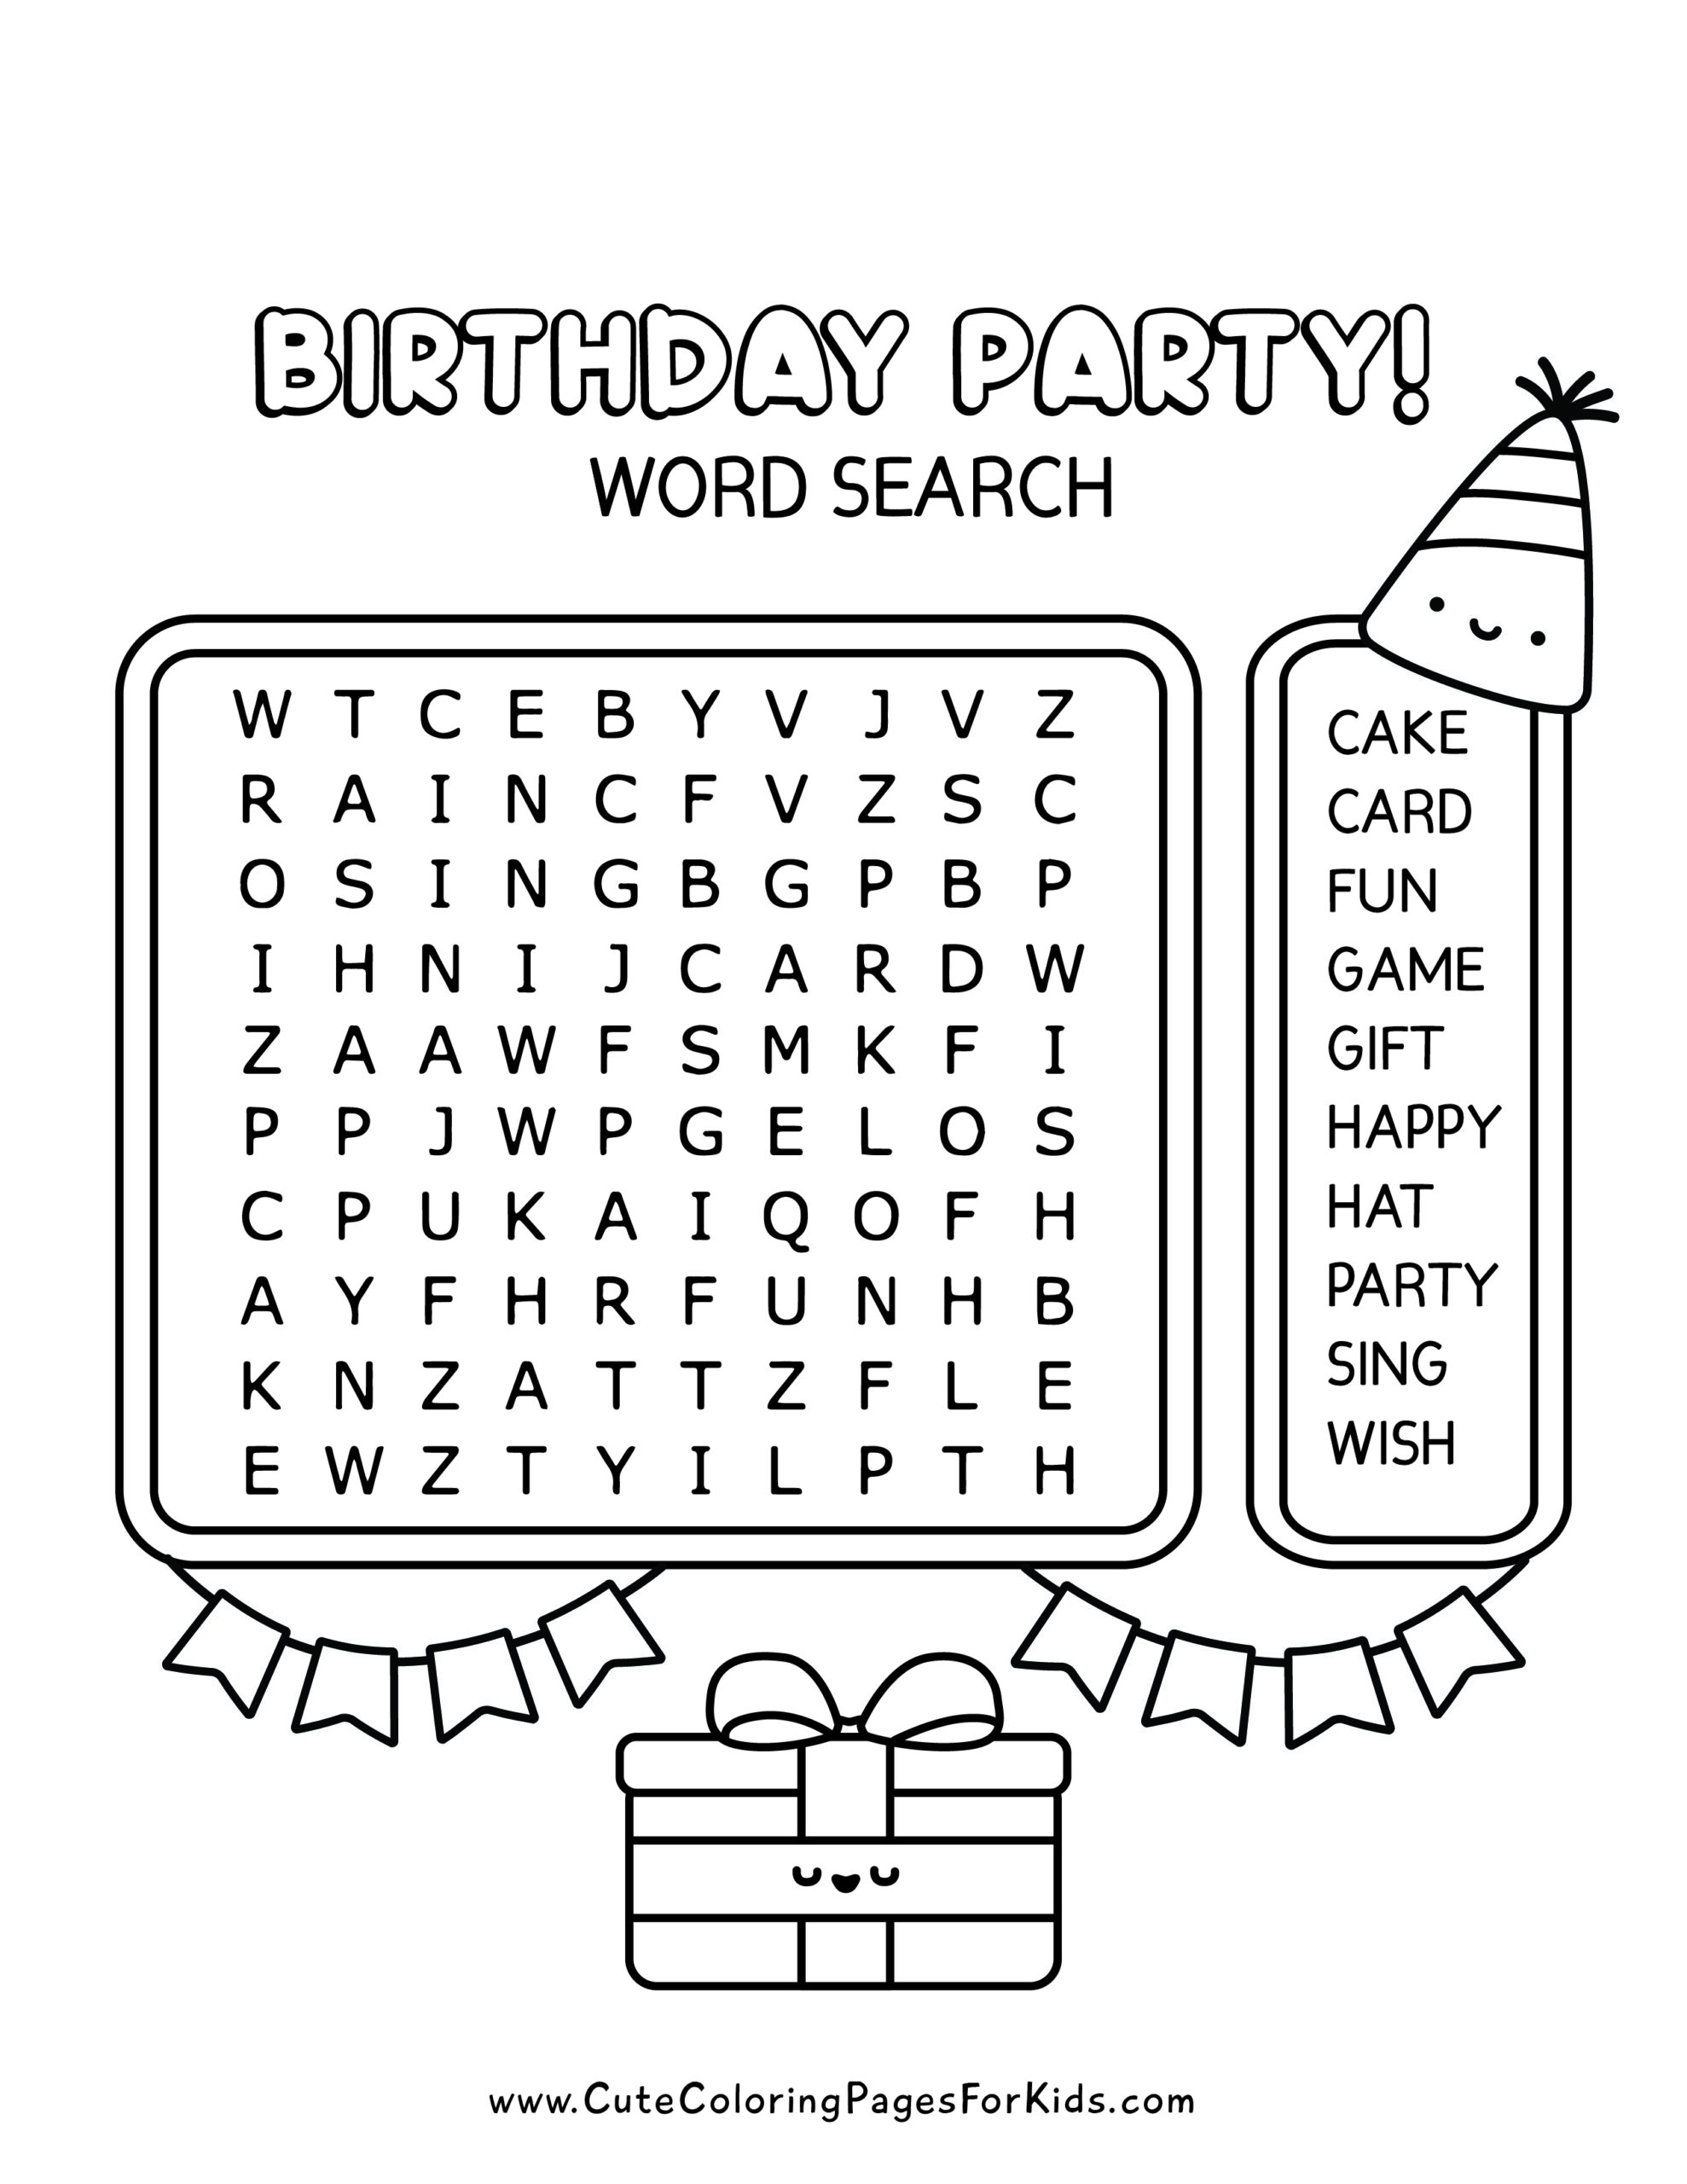 Birthday Party Word Search Cute Coloring Pages For Kids